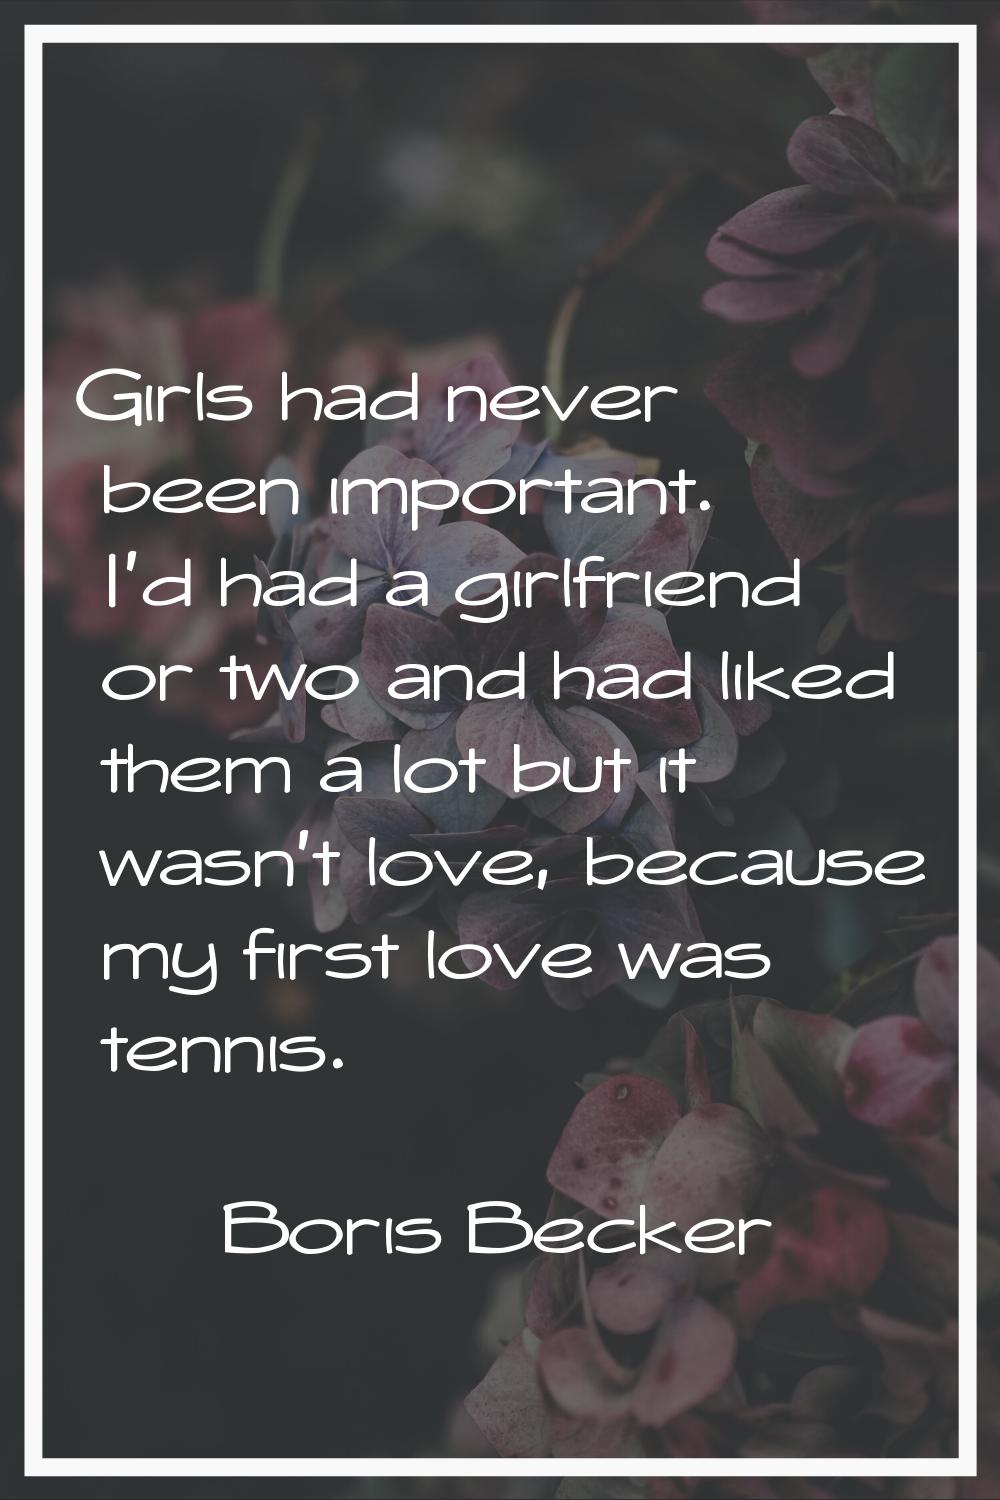 Girls had never been important. I'd had a girlfriend or two and had liked them a lot but it wasn't 